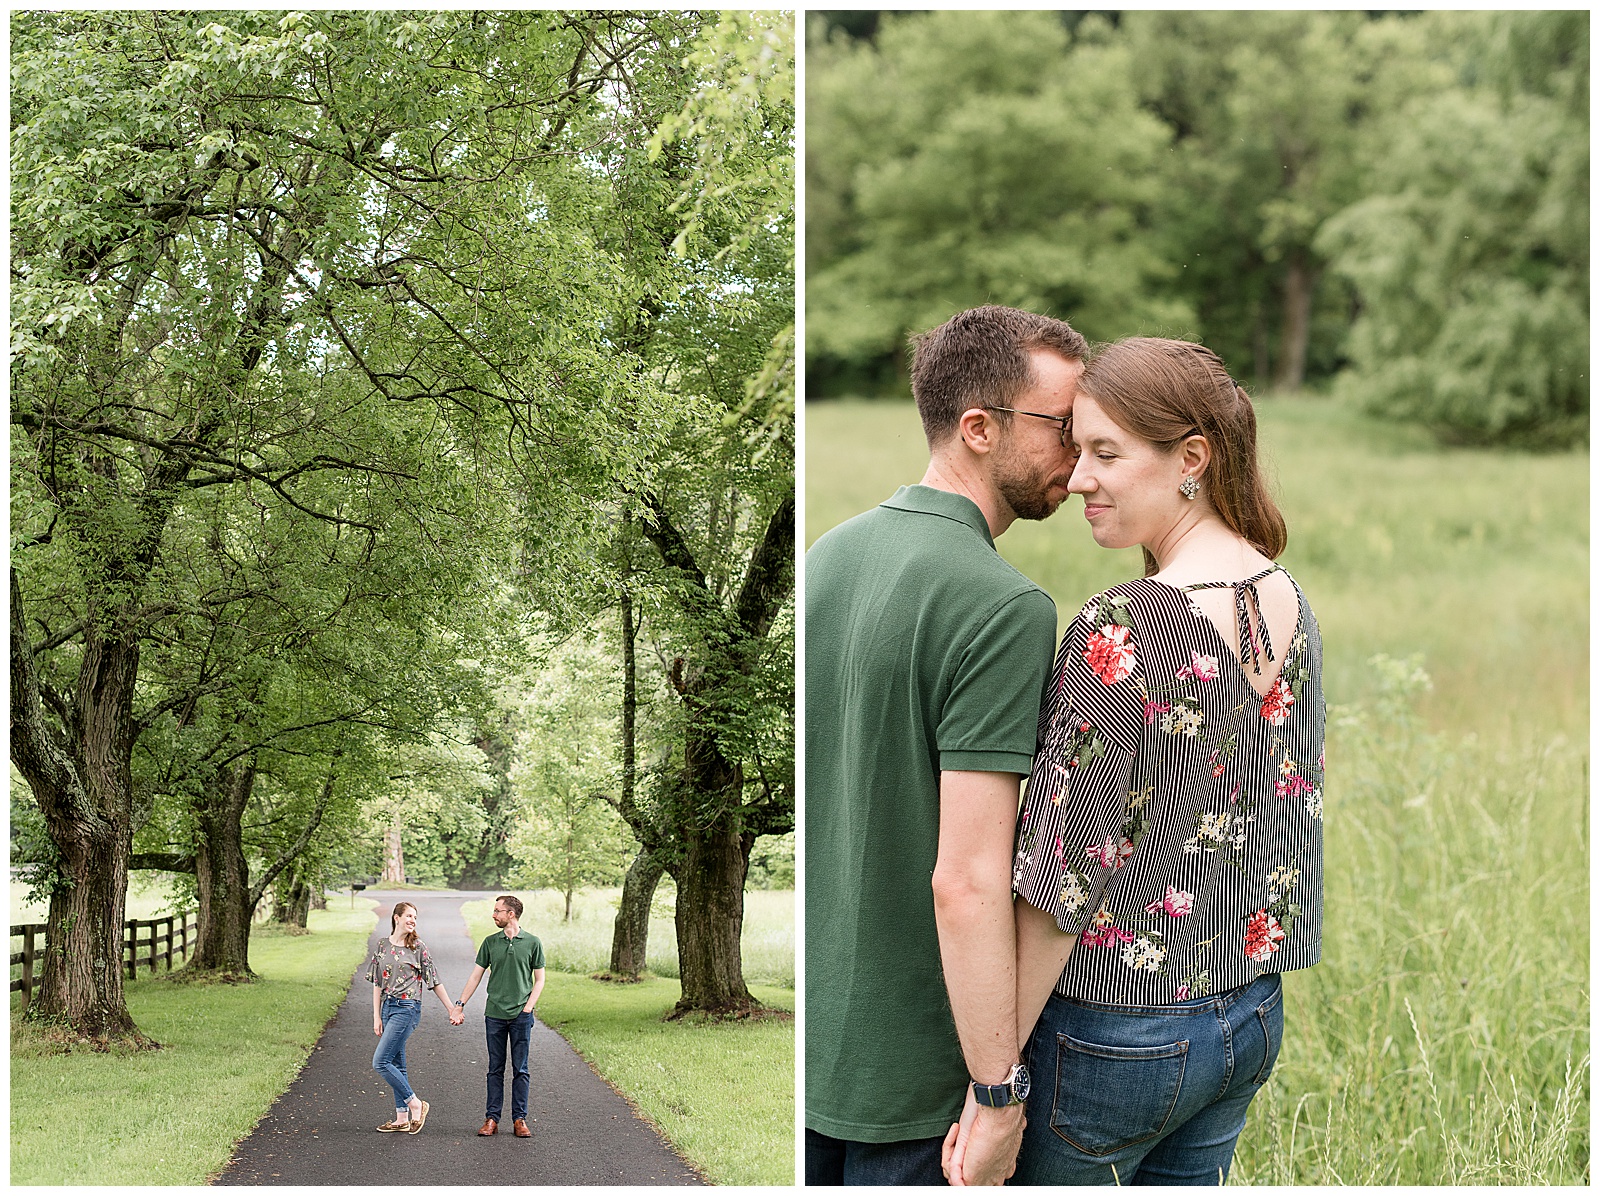 couple on paved tree-lined path holding hands as girl twists away from guy as they look at each other